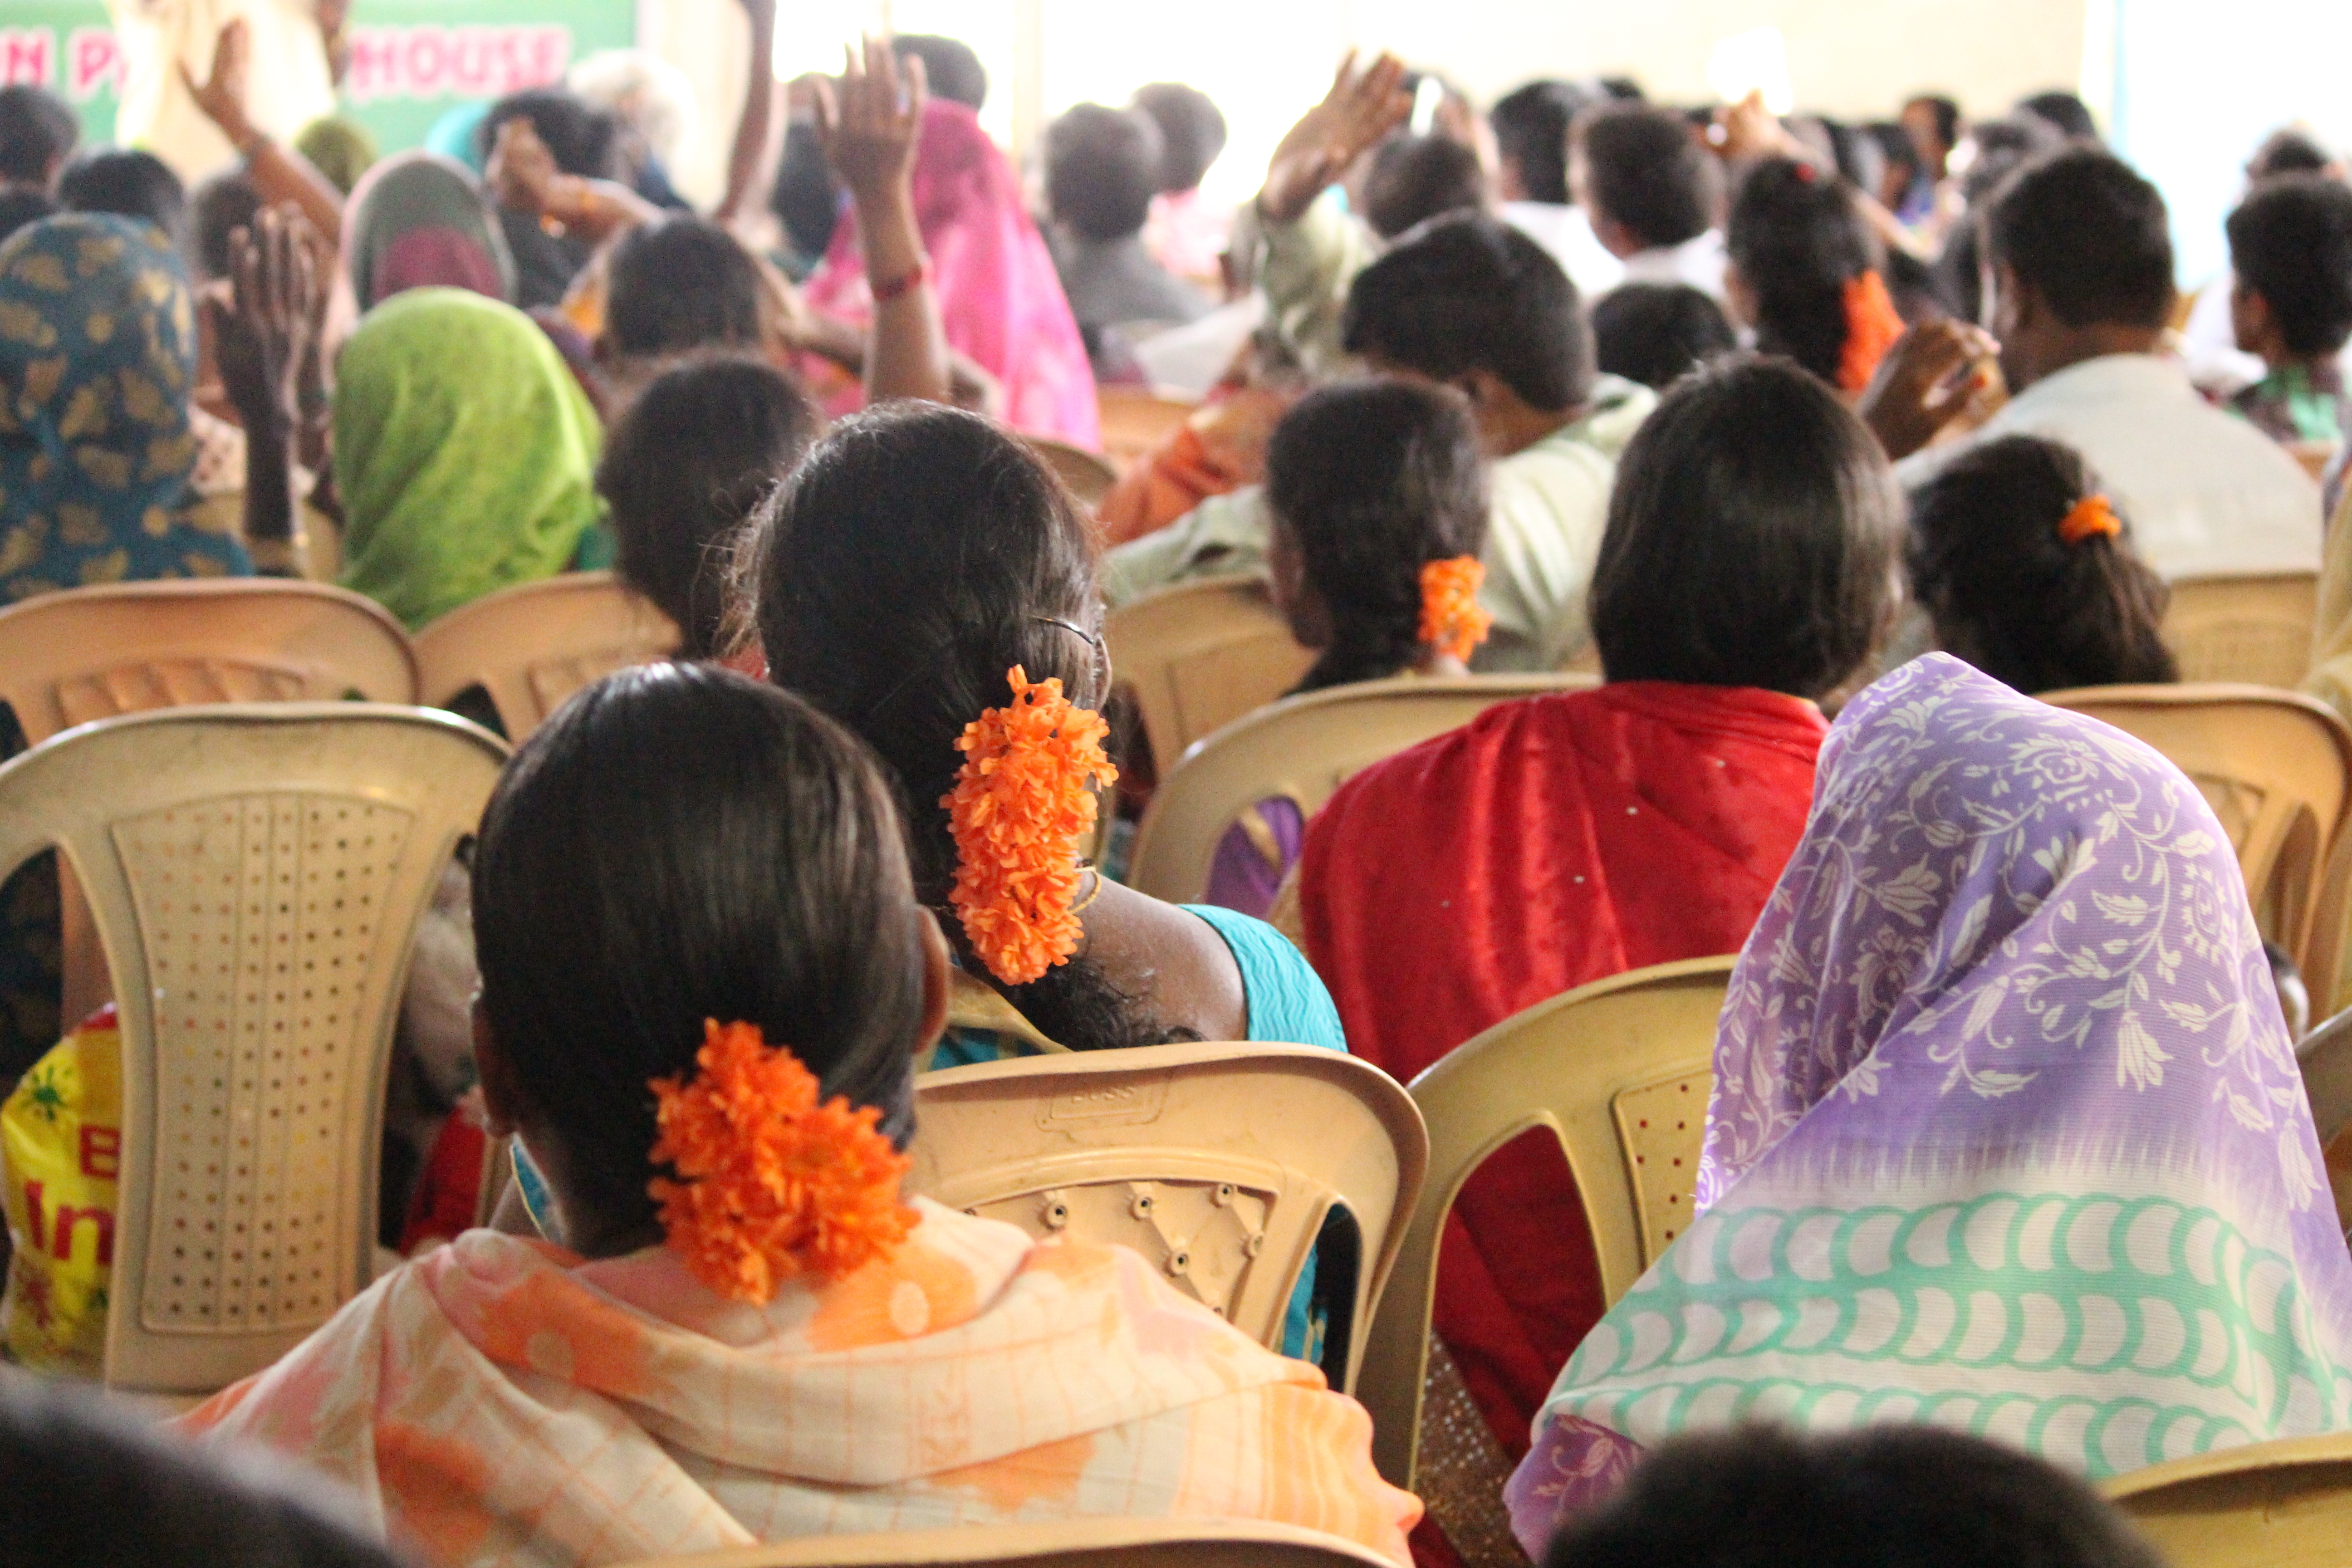 The non-traditional Christian communities make up nearly 60 per cent of the Christians in India. (World Watch Monitor)